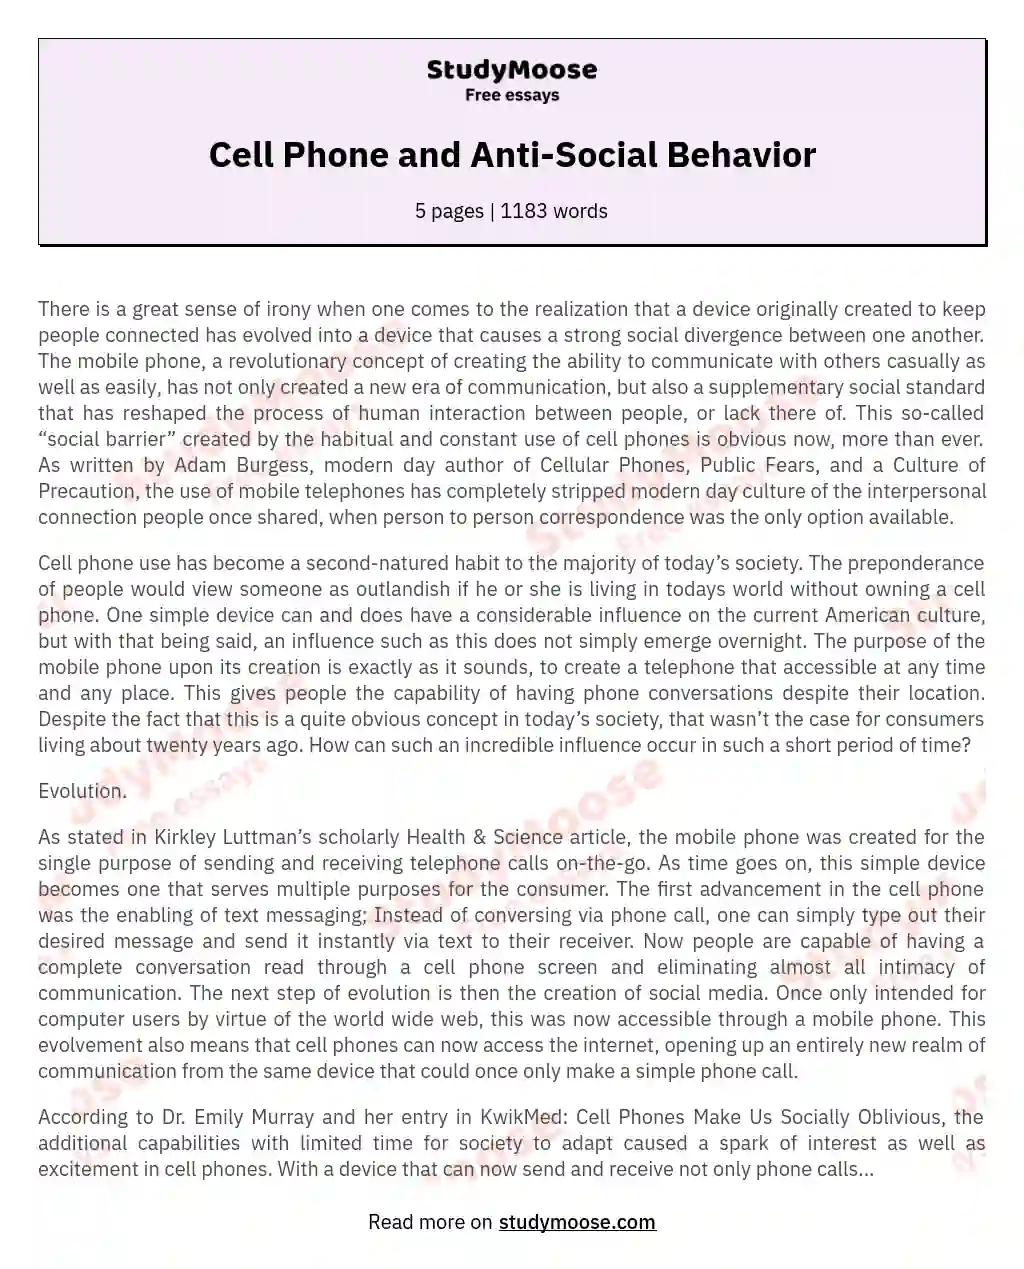 Cell Phone and Anti-Social Behavior